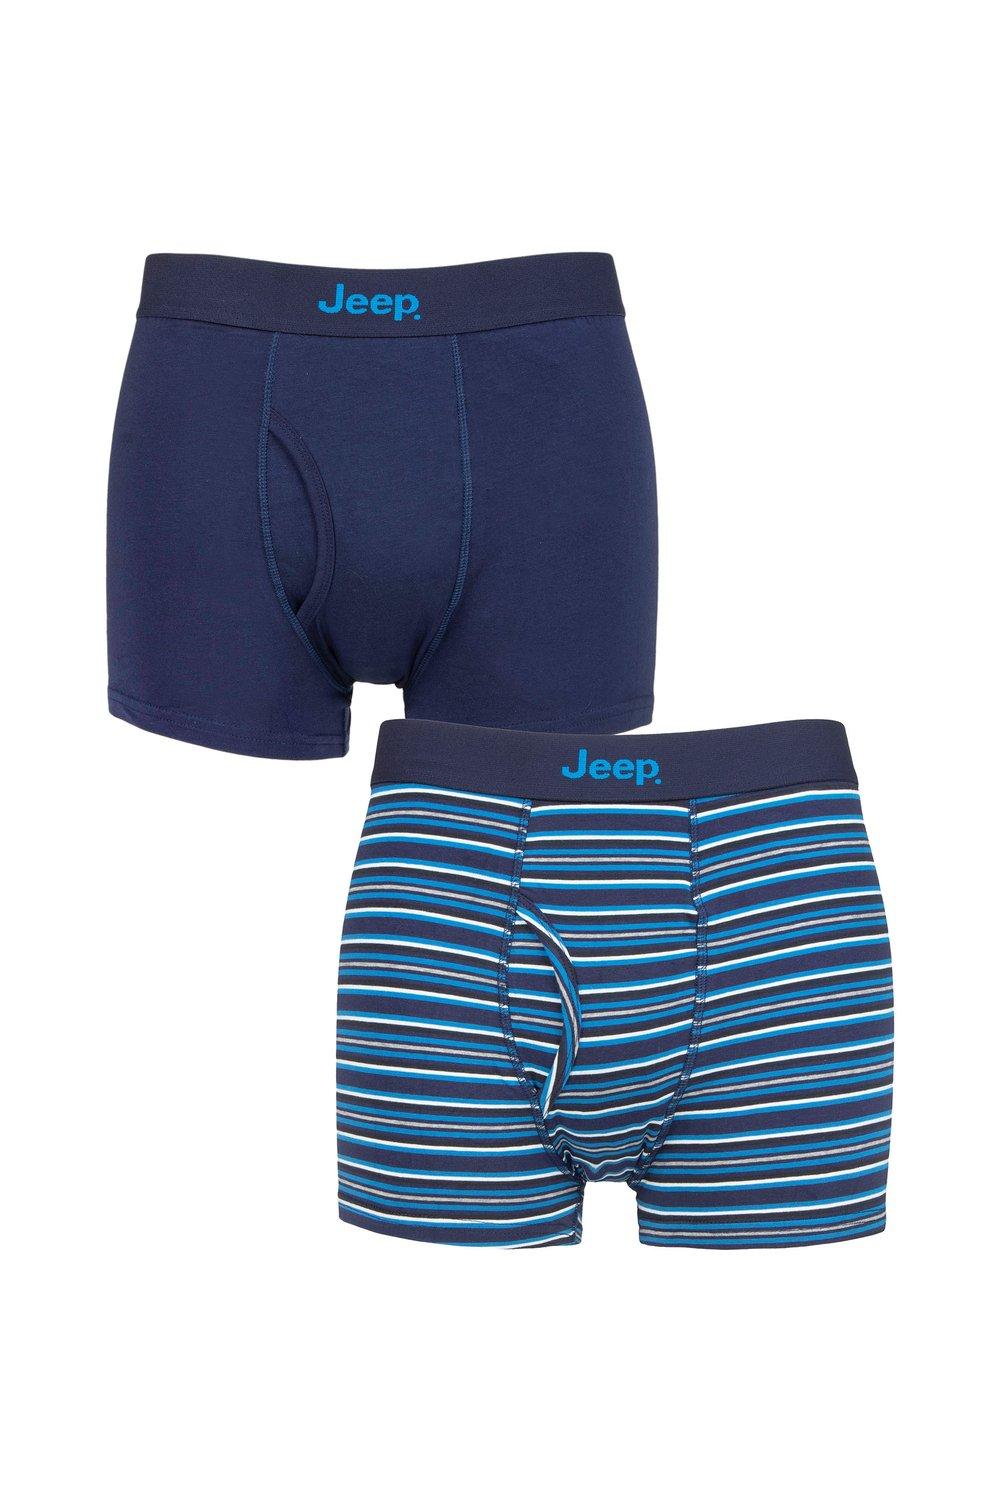 2 Pack Plain and Striped Cotton Keyhole Trunks